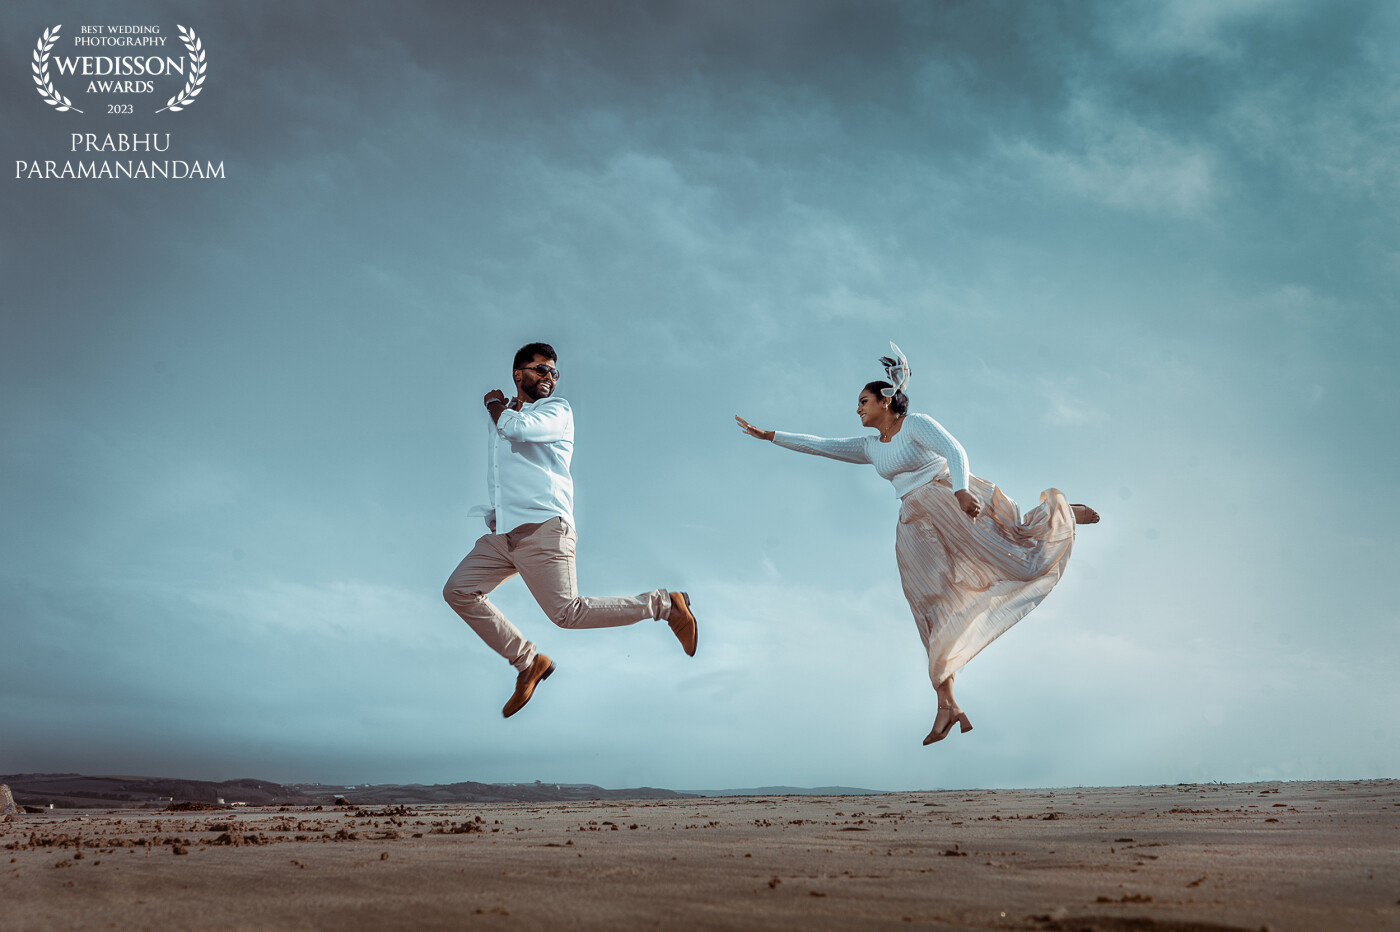 The shot was framed to convey Love is in the air. Love is usually symbolised with flying in the air, feeling light and happy. I wanted to add a fun element to this shot and that's revealed with the couple chasing each other.